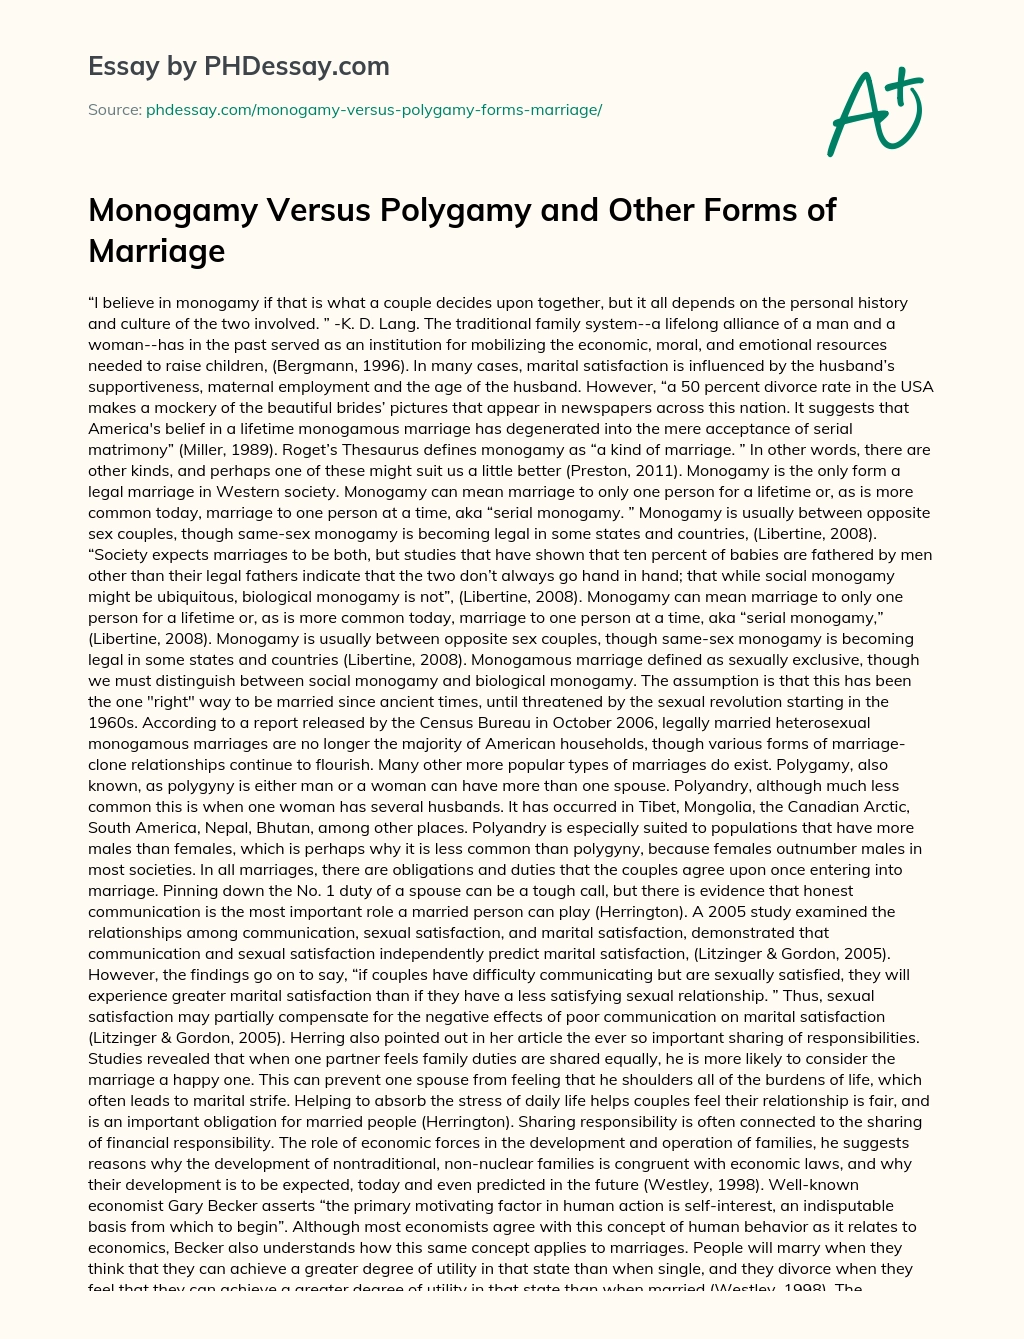 Monogamy Versus Polygamy and Other Forms of Marriage essay